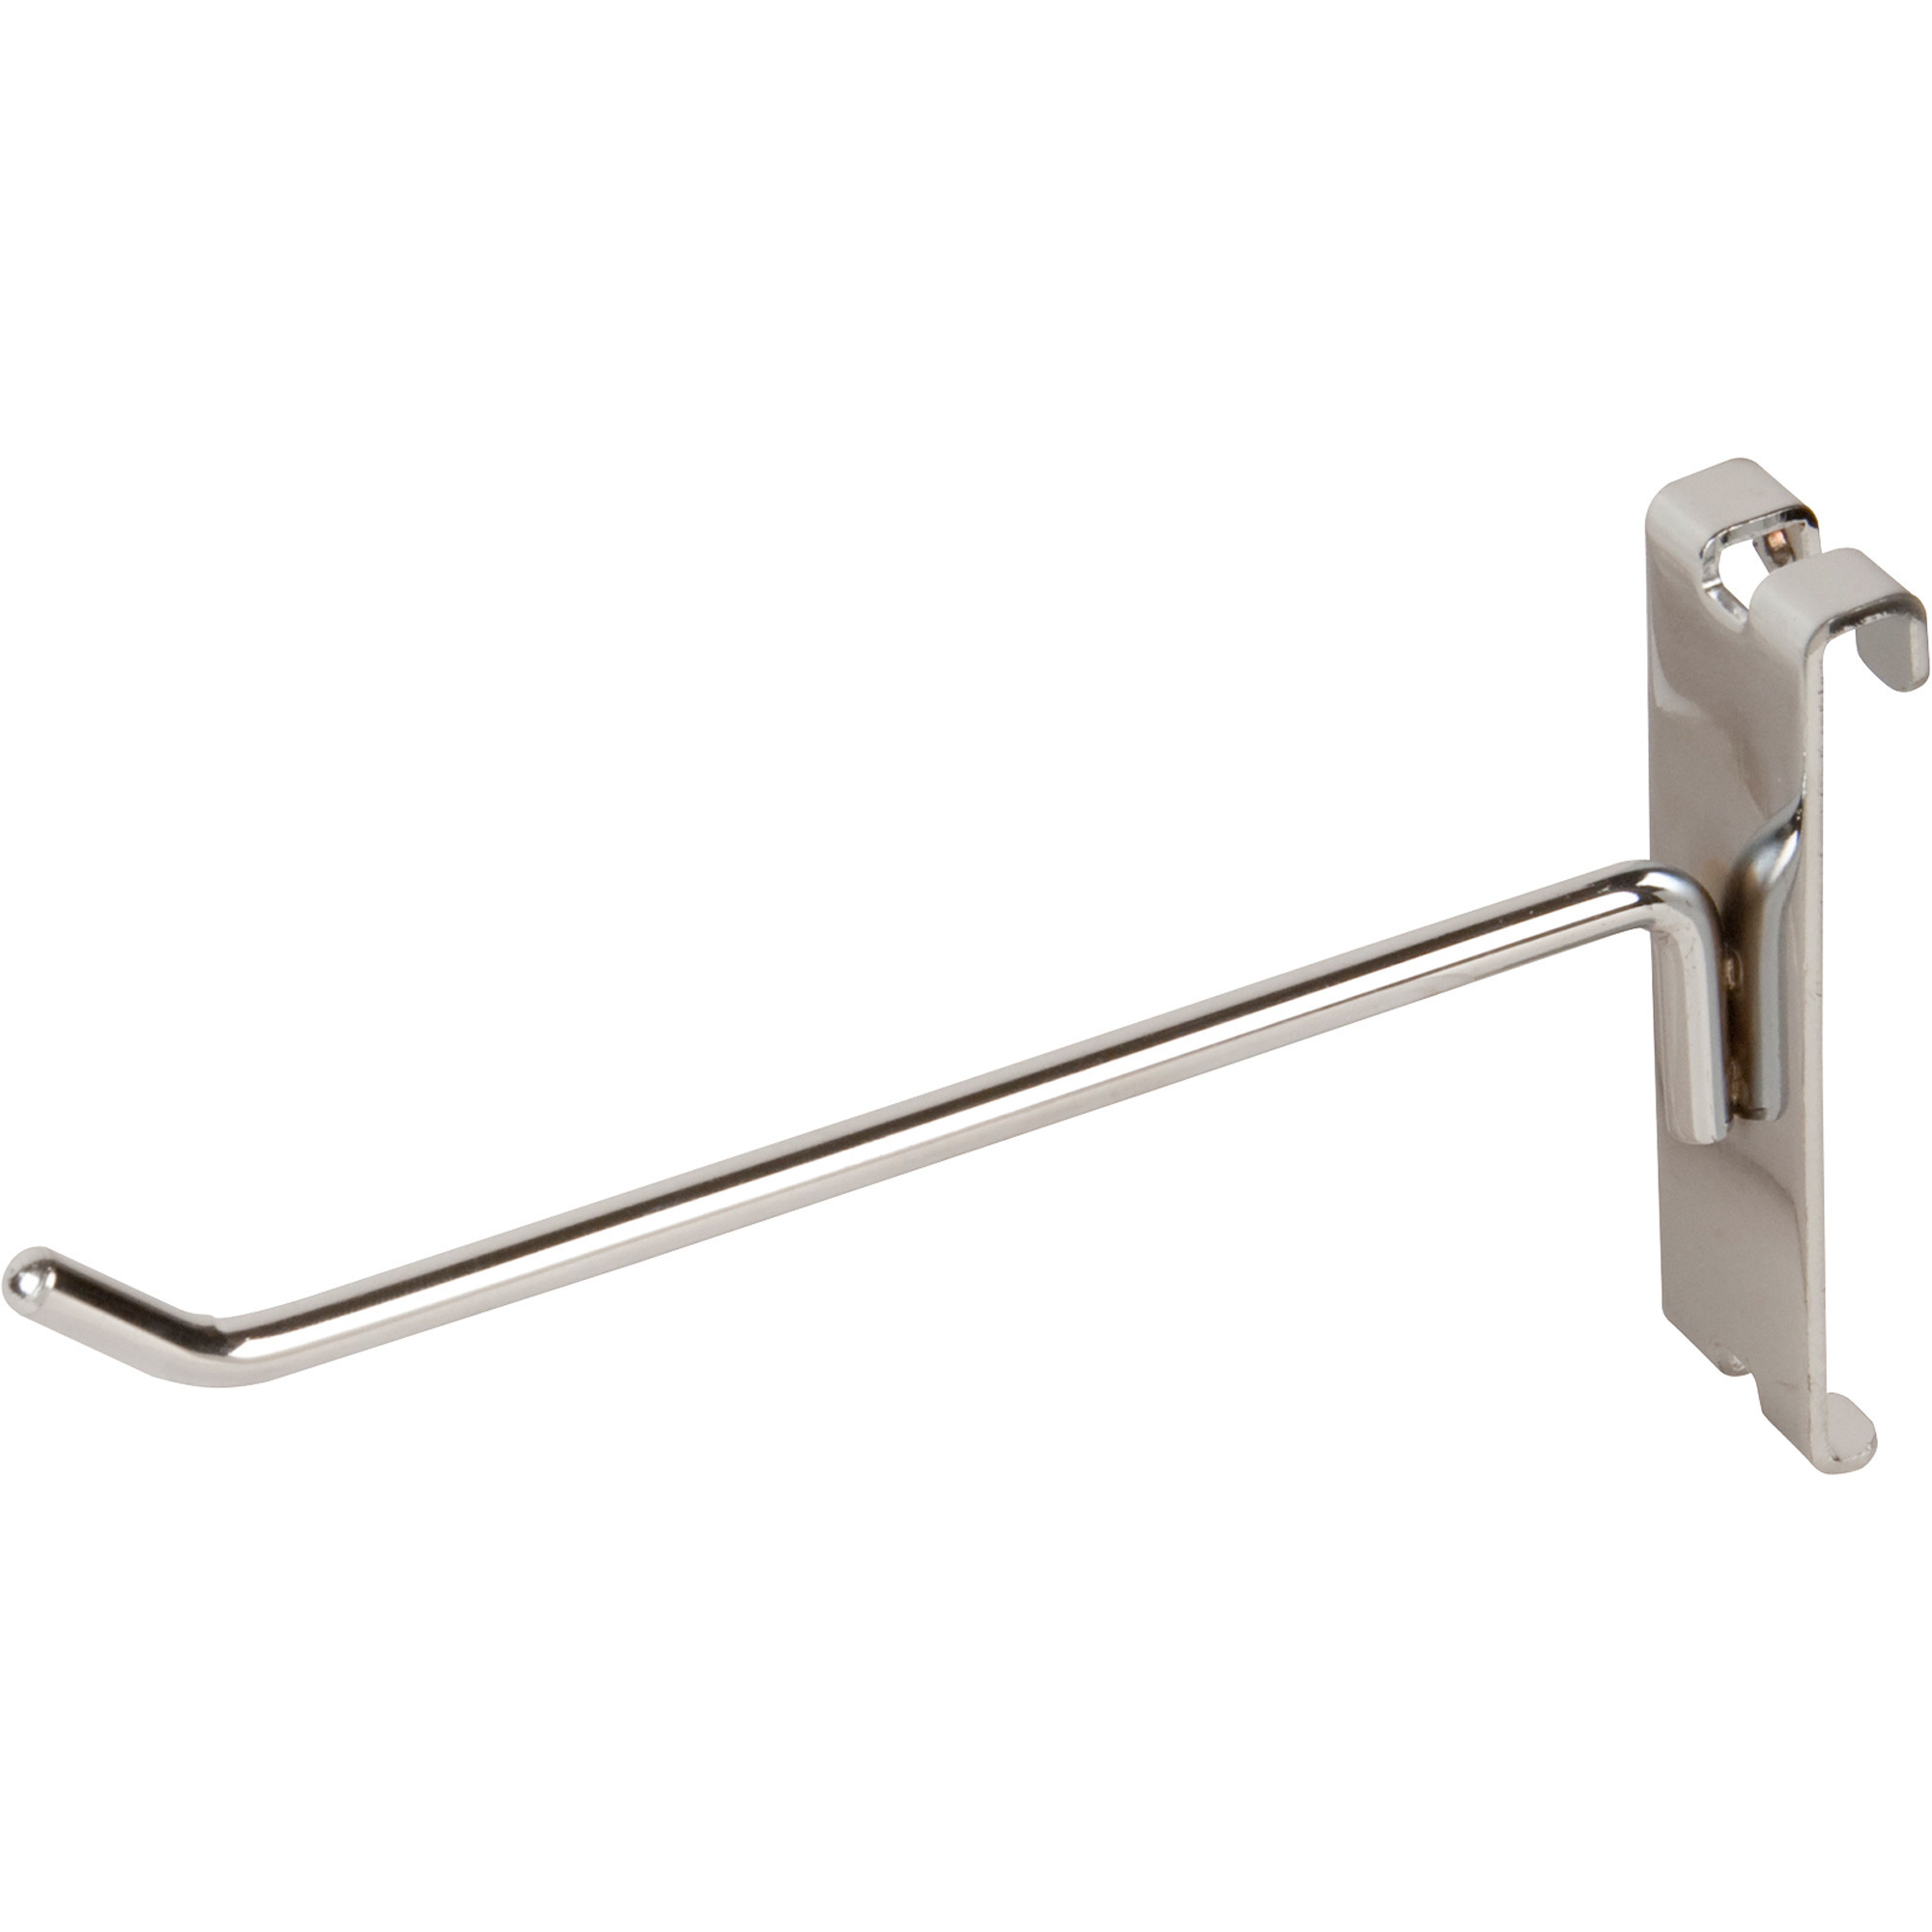 Econoco 6in. Gridwall Hook 96-Pk. — Chrome, Model# GW/H6 | Northern Tool